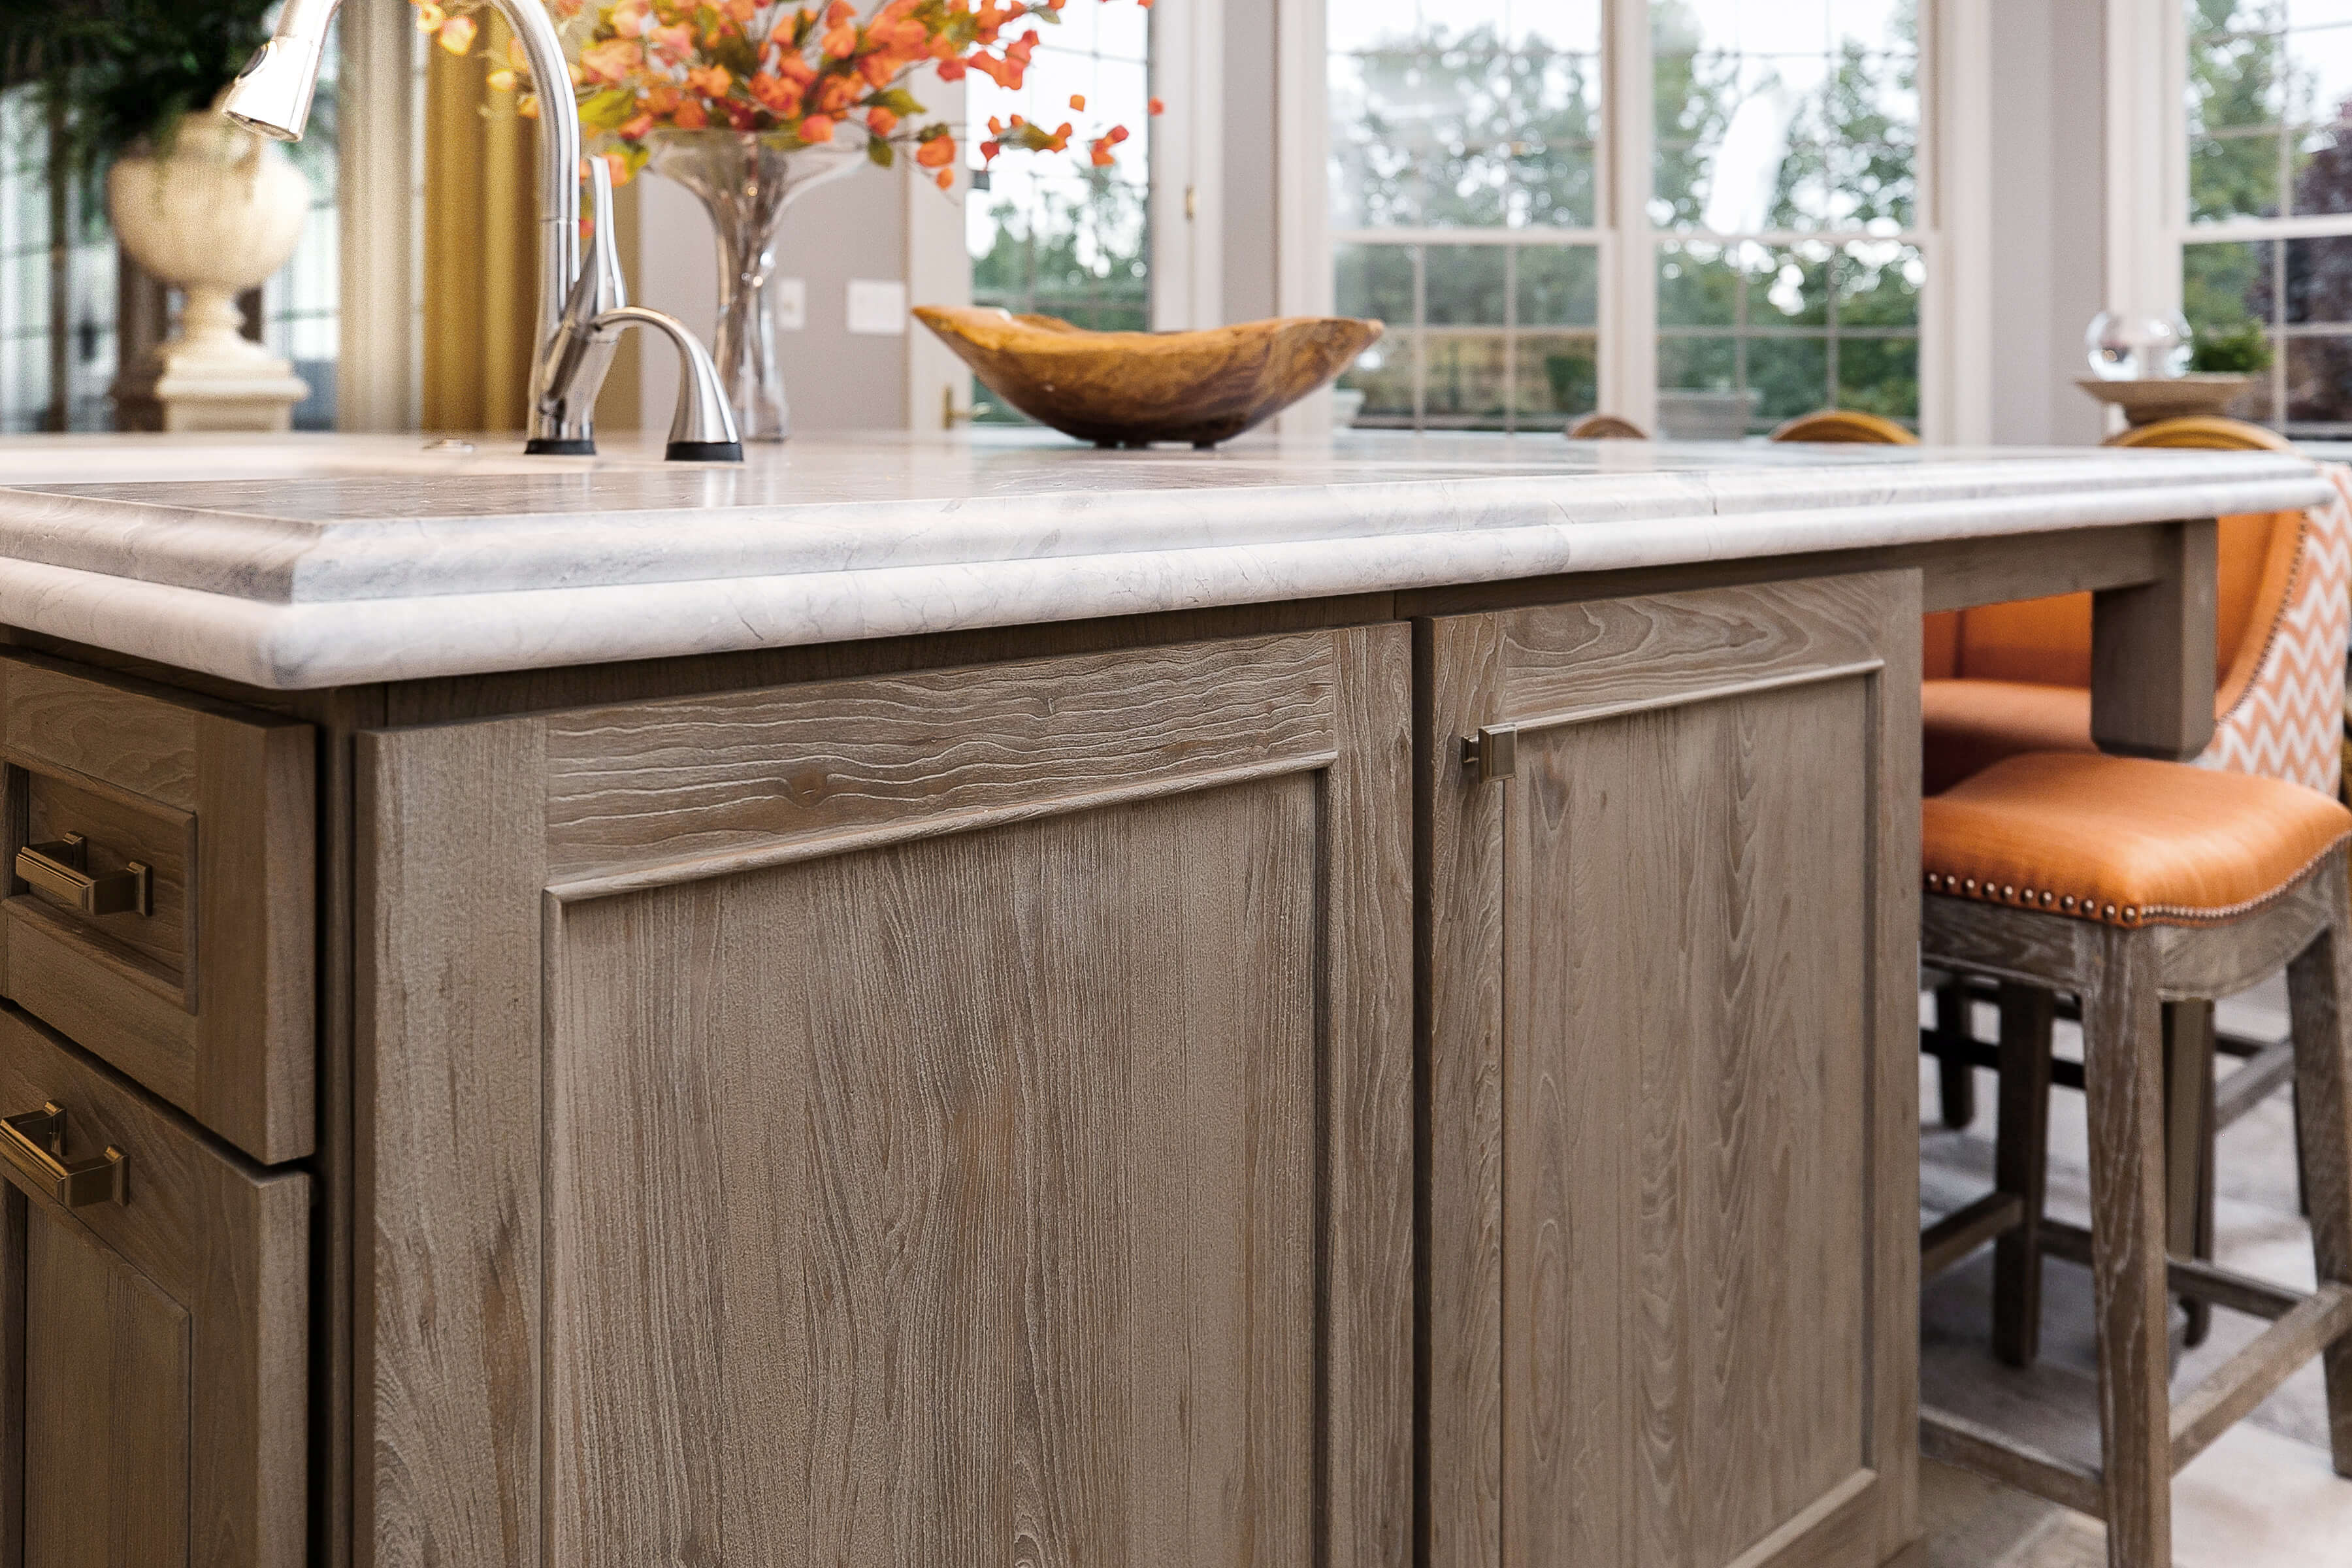 A rustic weathered wood kitchen island with orange fall-inspired accents.